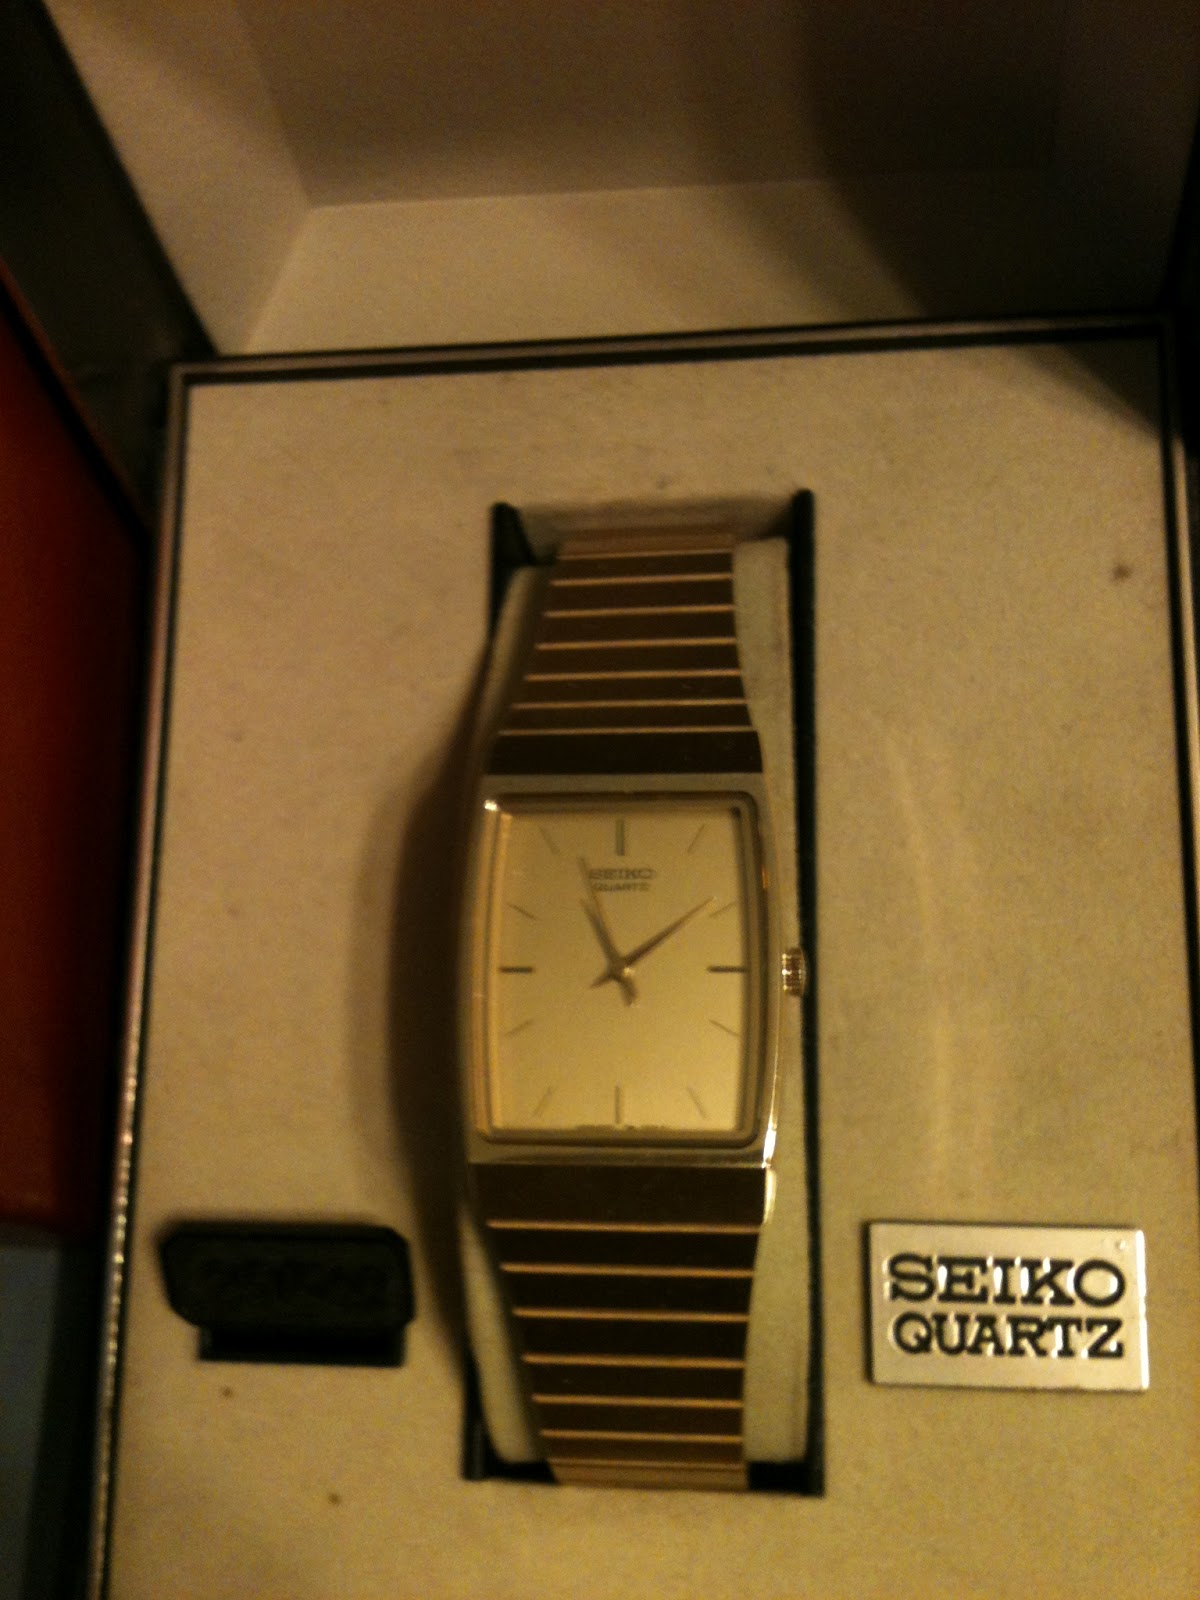 Thin Band, Seiko New Old Stock, works and shines like new Men's Quartz